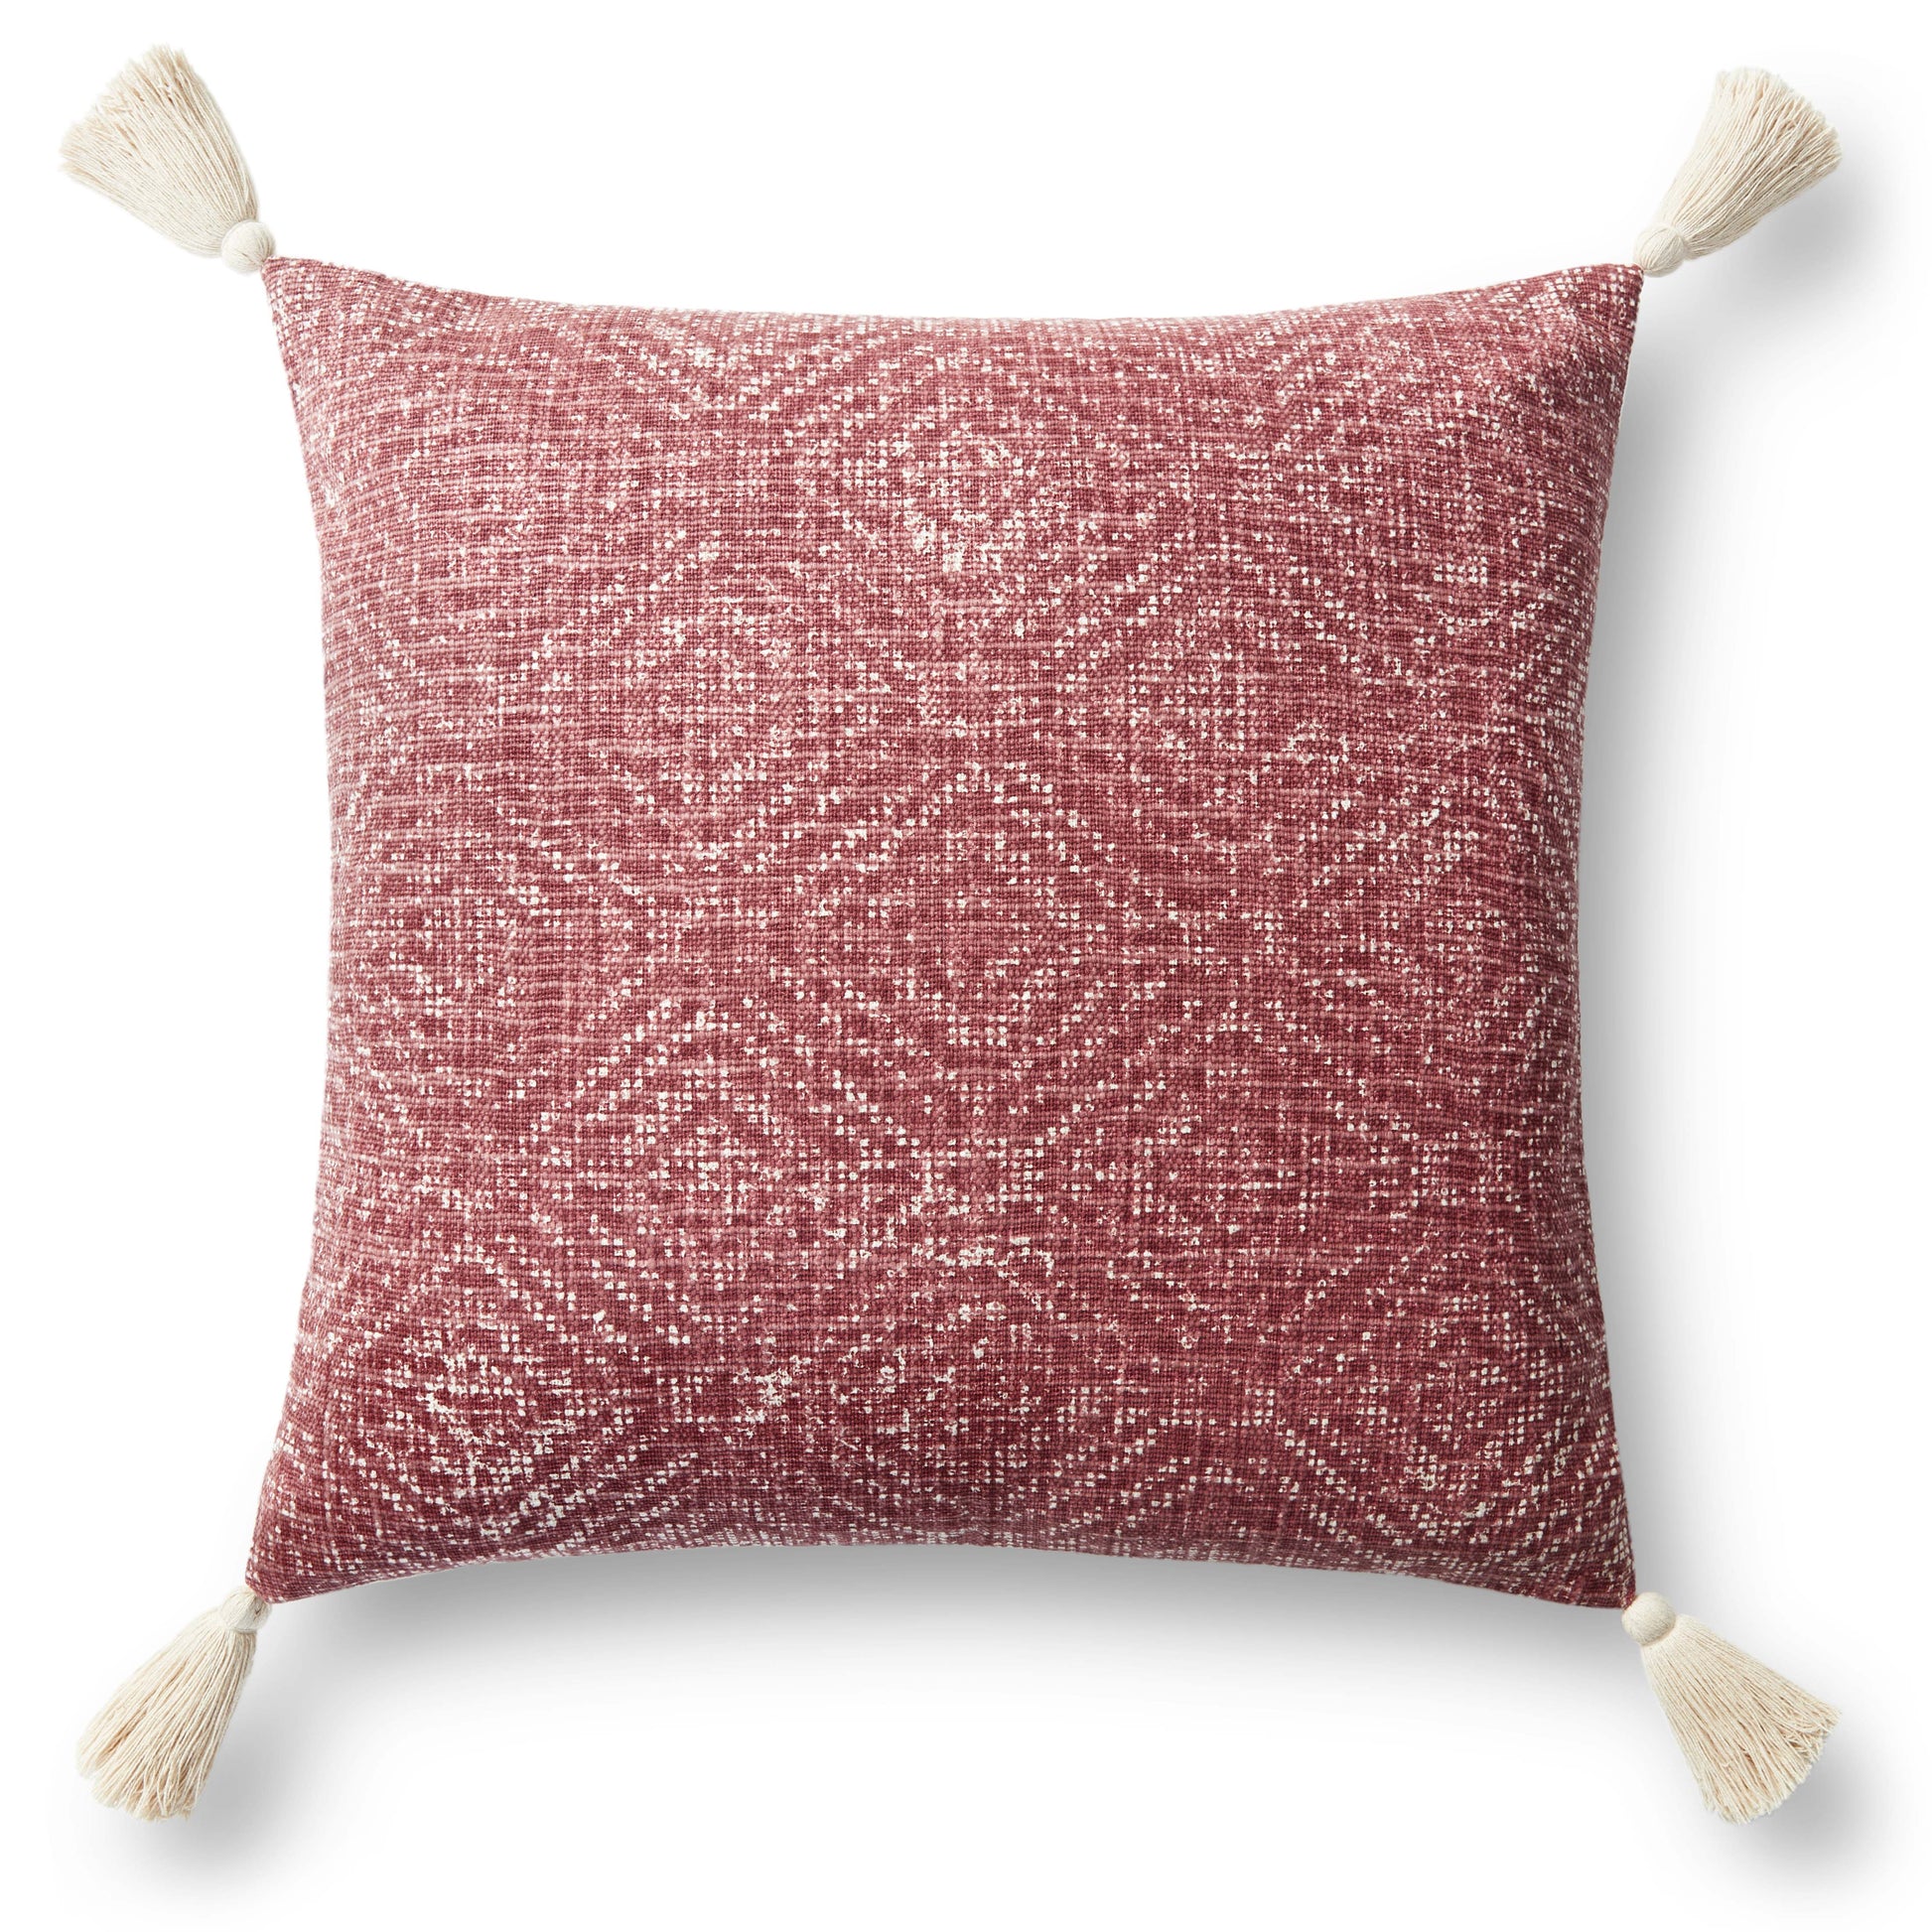 Photo of a pillow;  P0621 Red 13" x 21" Cover w/Poly Pillow